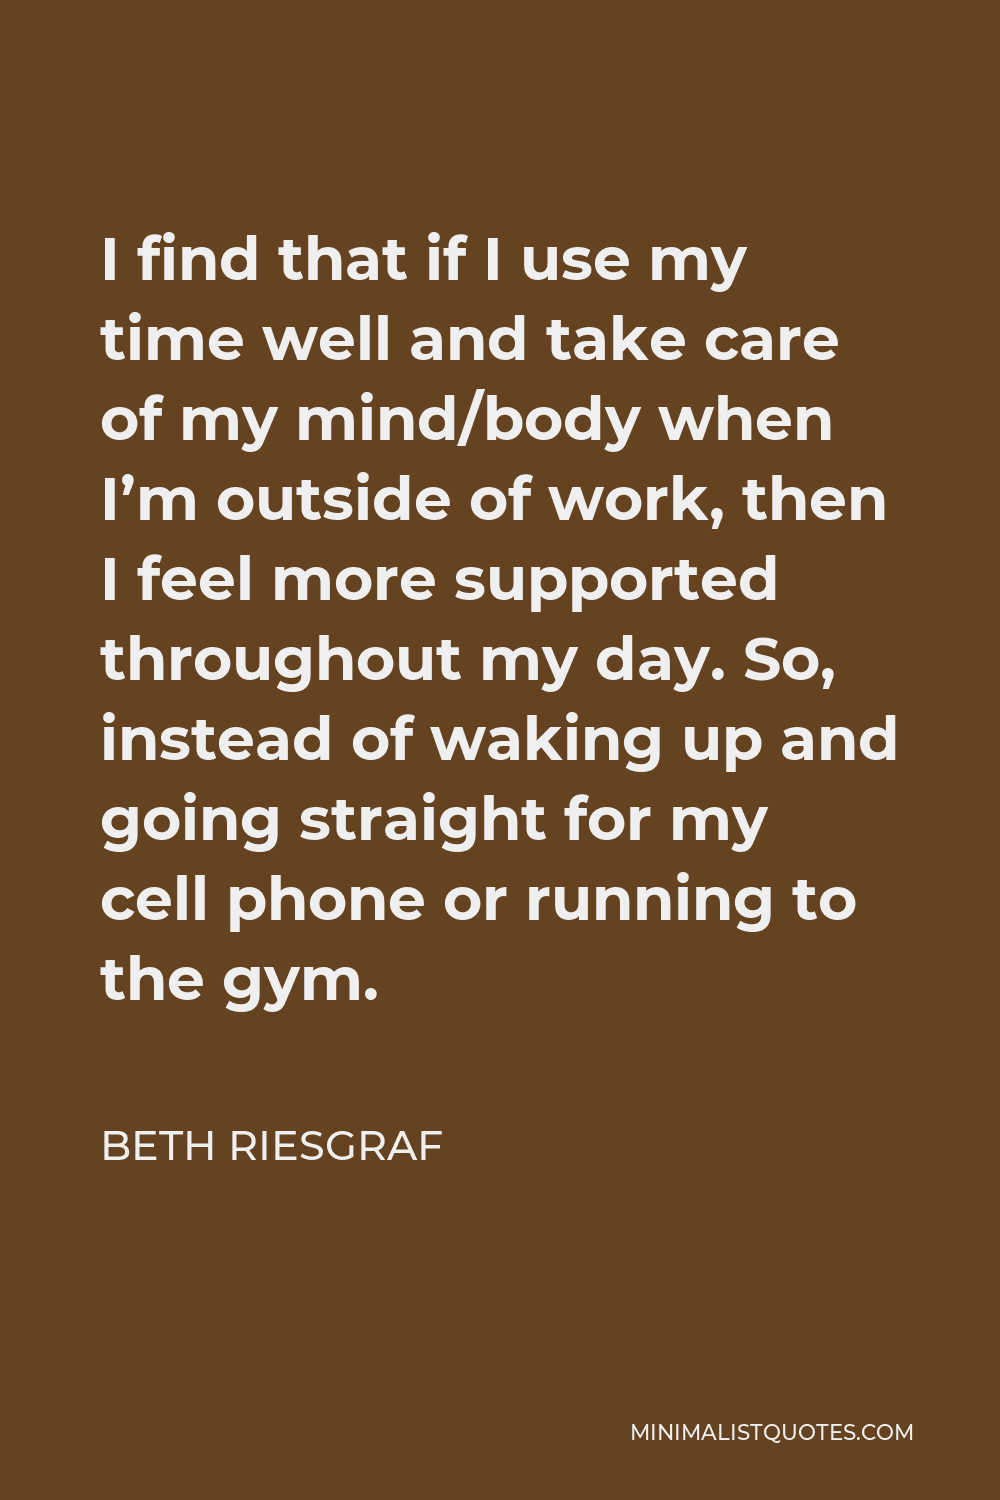 Beth Riesgraf Quote - I find that if I use my time well and take care of my mind/body when I’m outside of work, then I feel more supported throughout my day. So, instead of waking up and going straight for my cell phone or running to the gym.